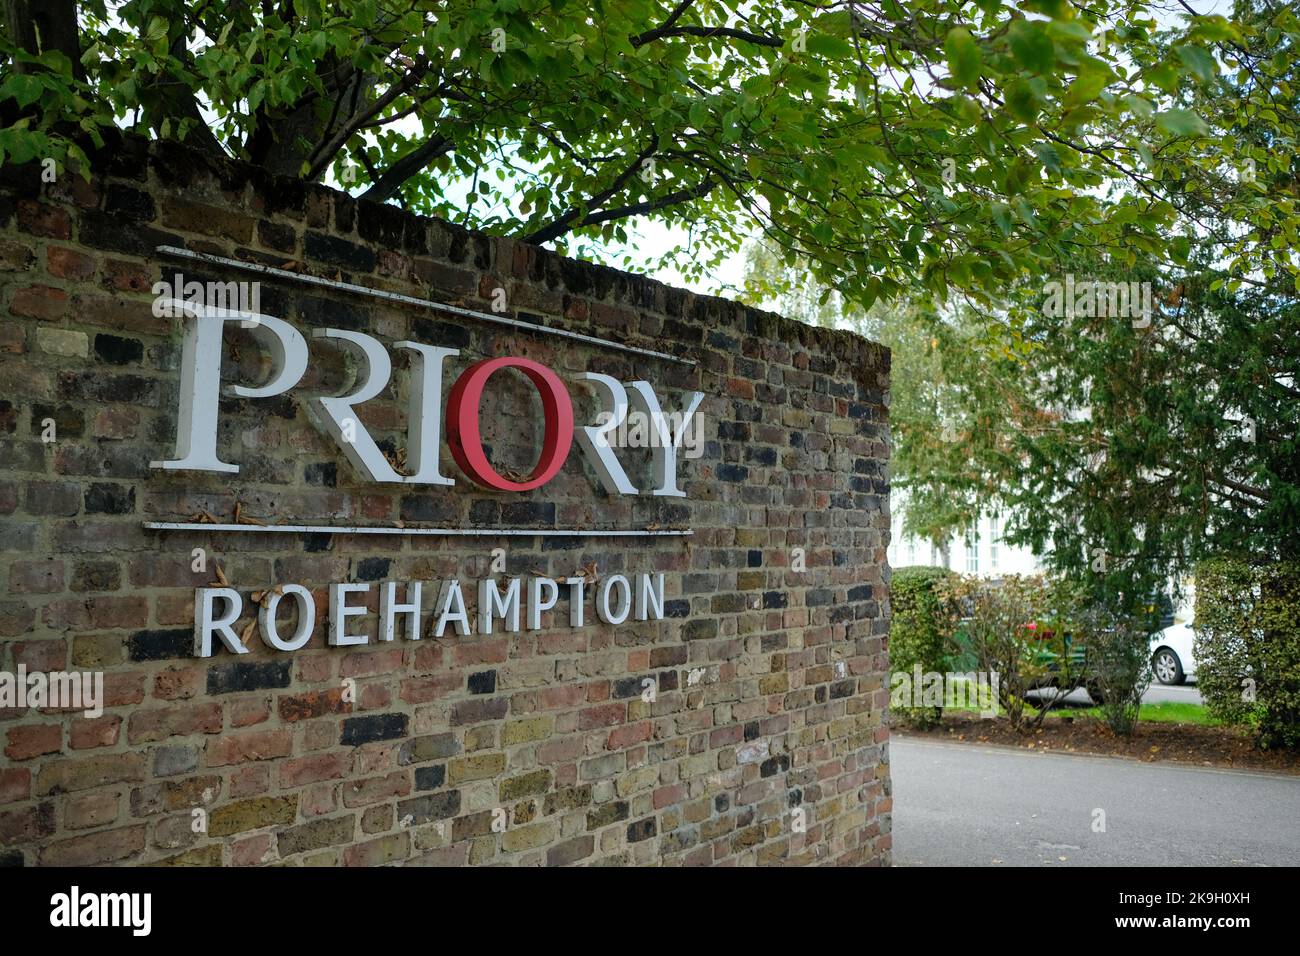 London- October 2022: Priory Roehampton AKA The Priory, a mental health and rehab clinic Stock Photo